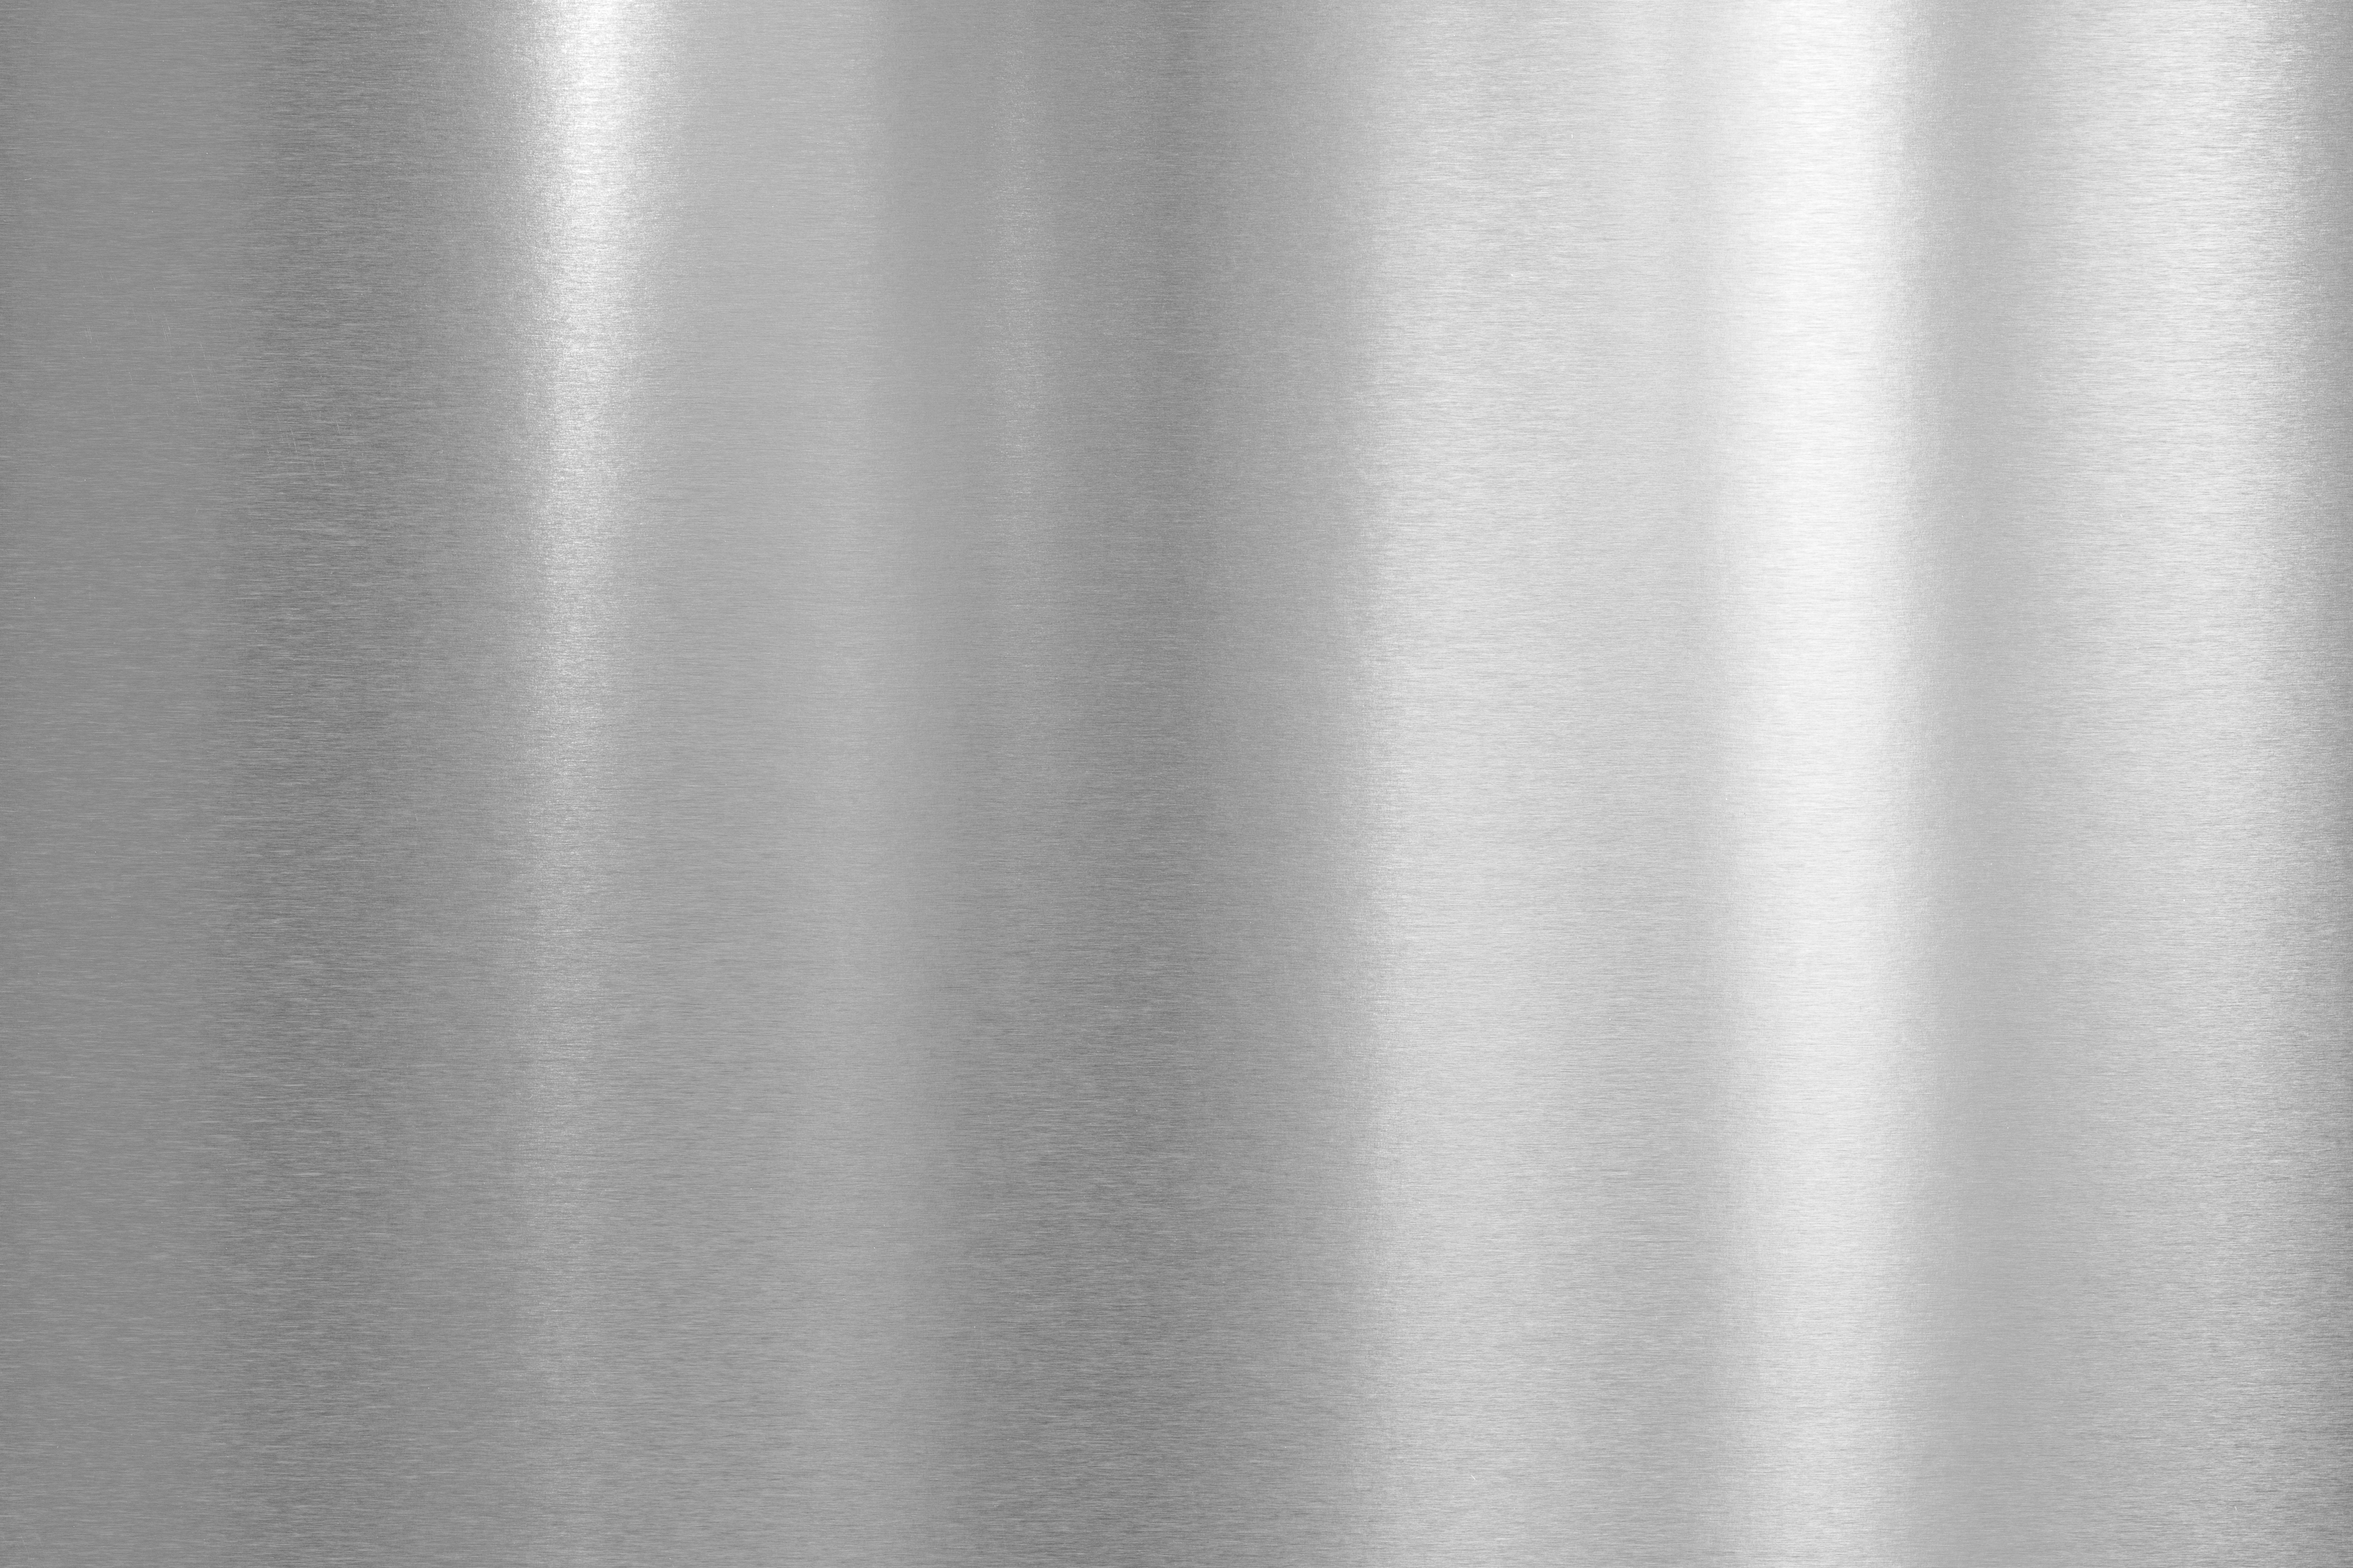 Brushed Metal Background Free Stock Photo Public Domain Pictures | My ...